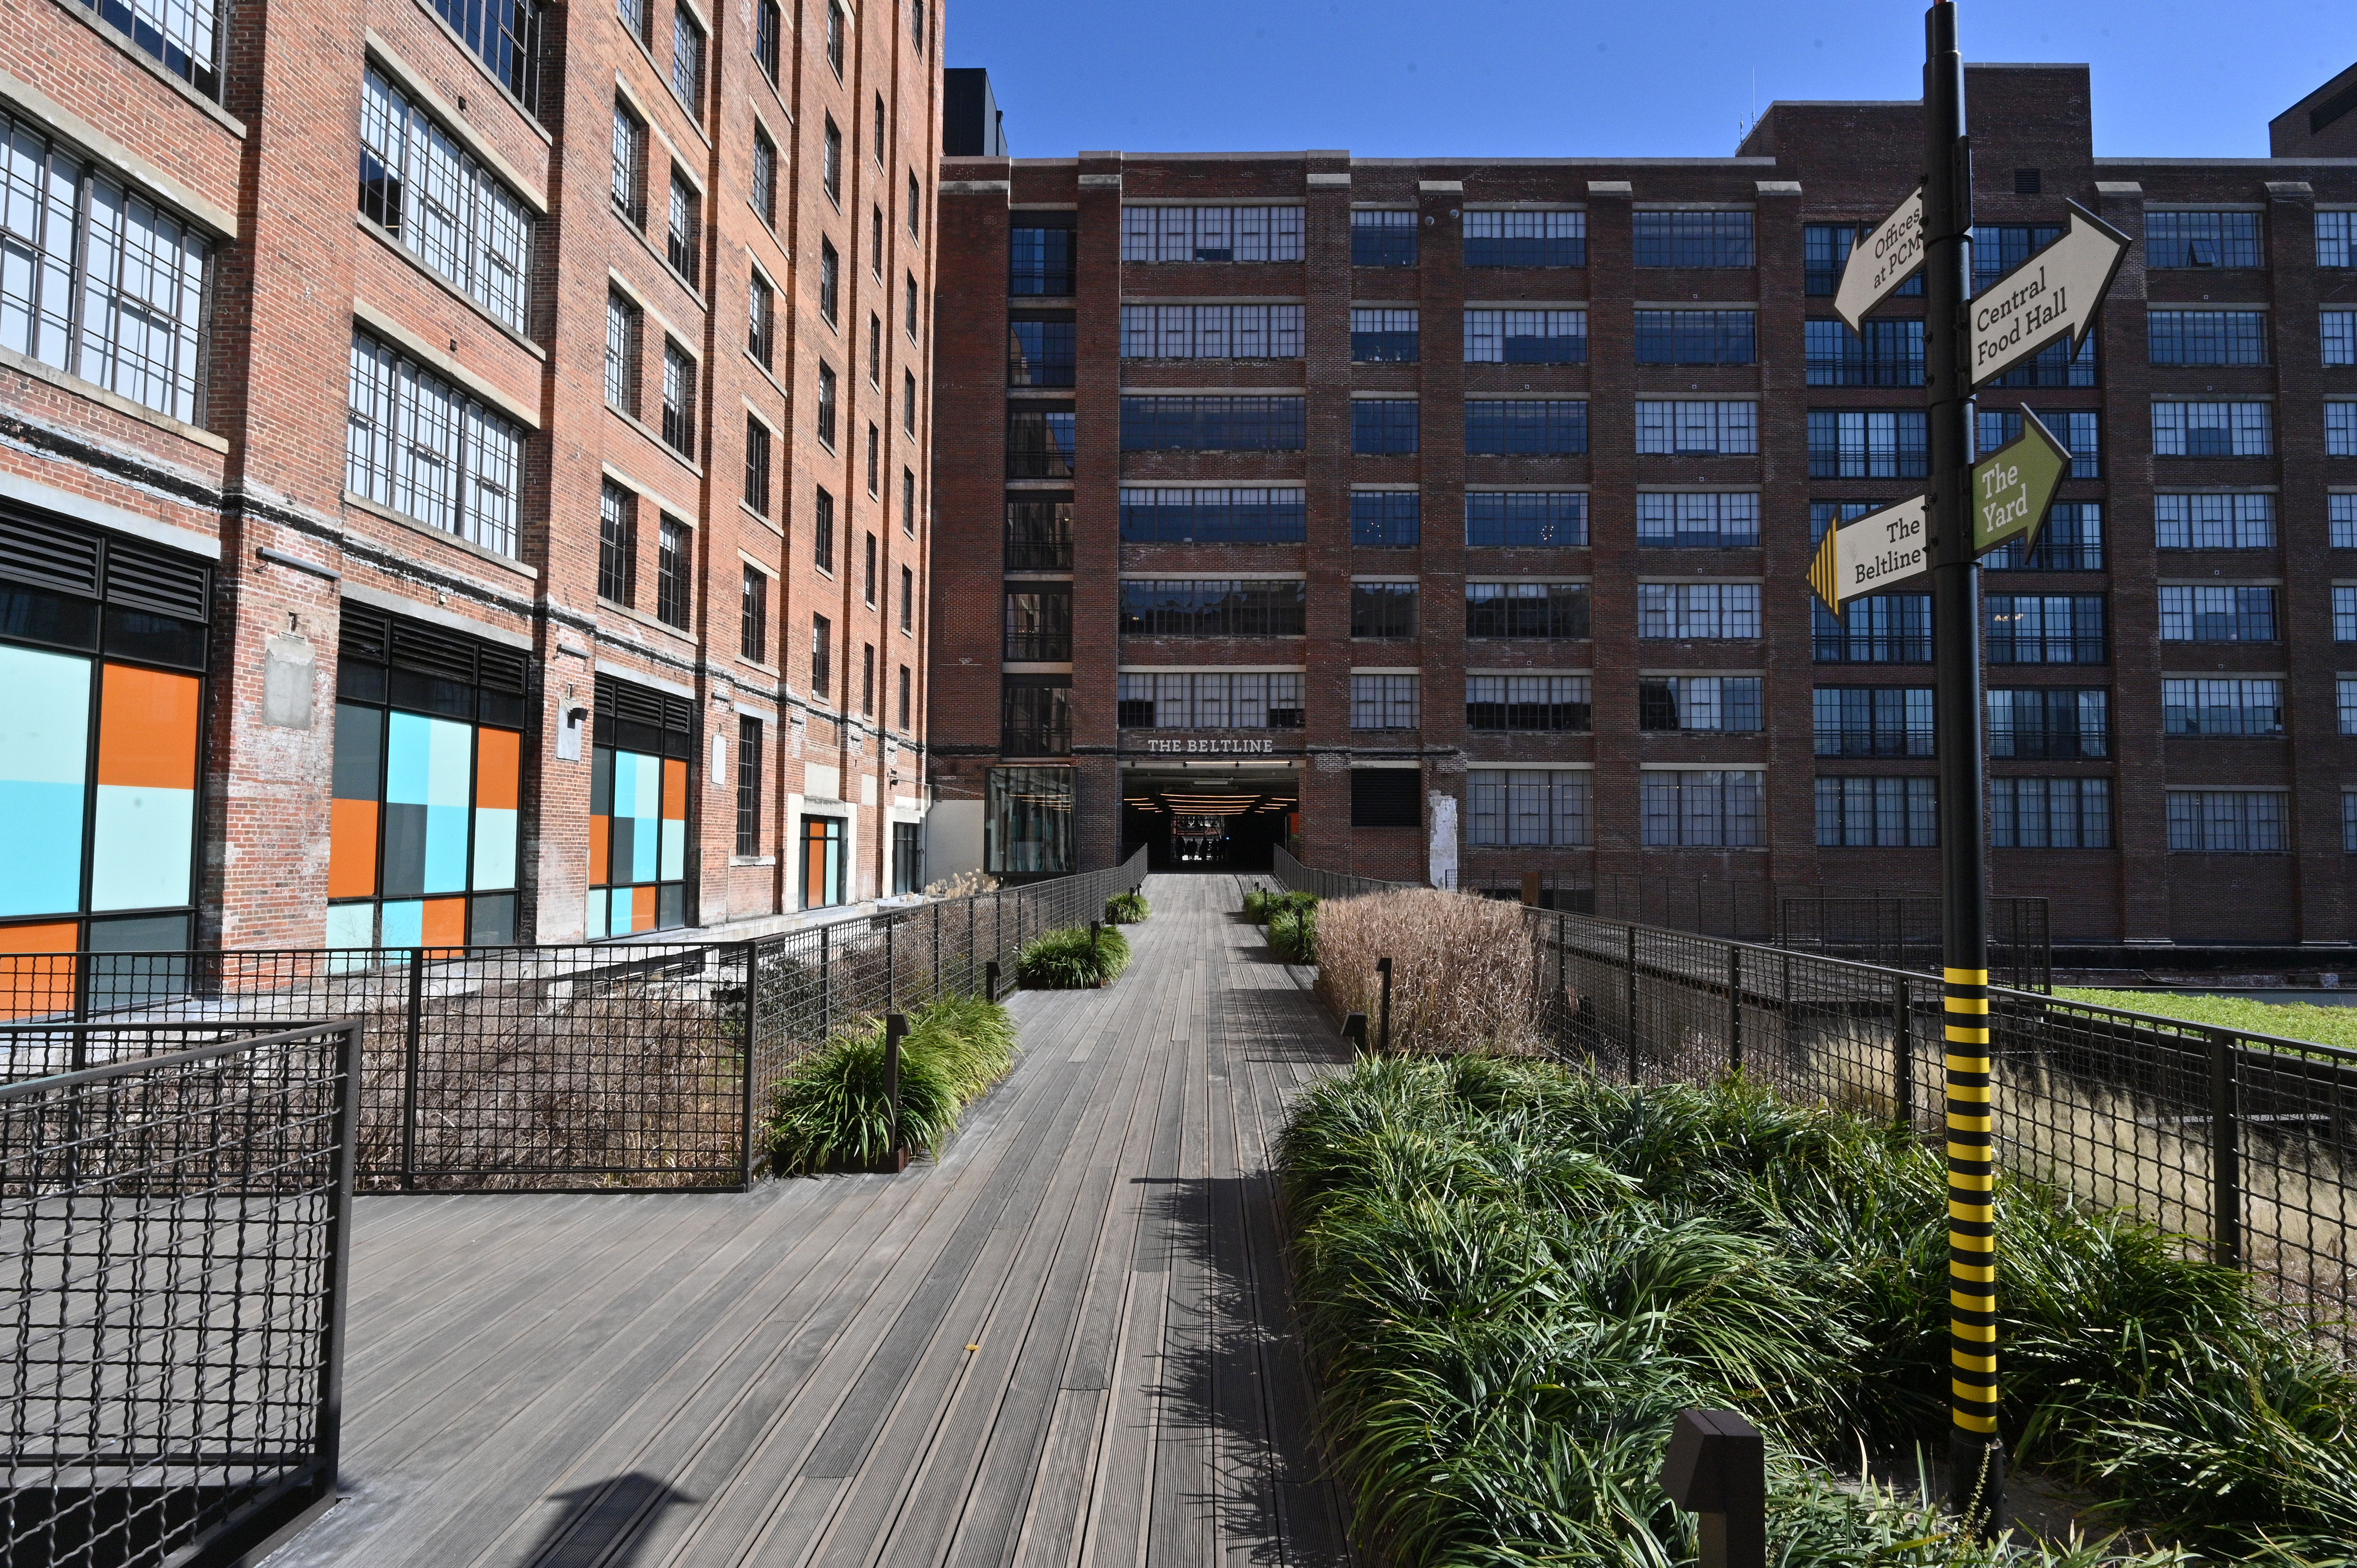 Ponce City Market developer completes deal for The Shops Buckhead - Atlanta  Business Chronicle